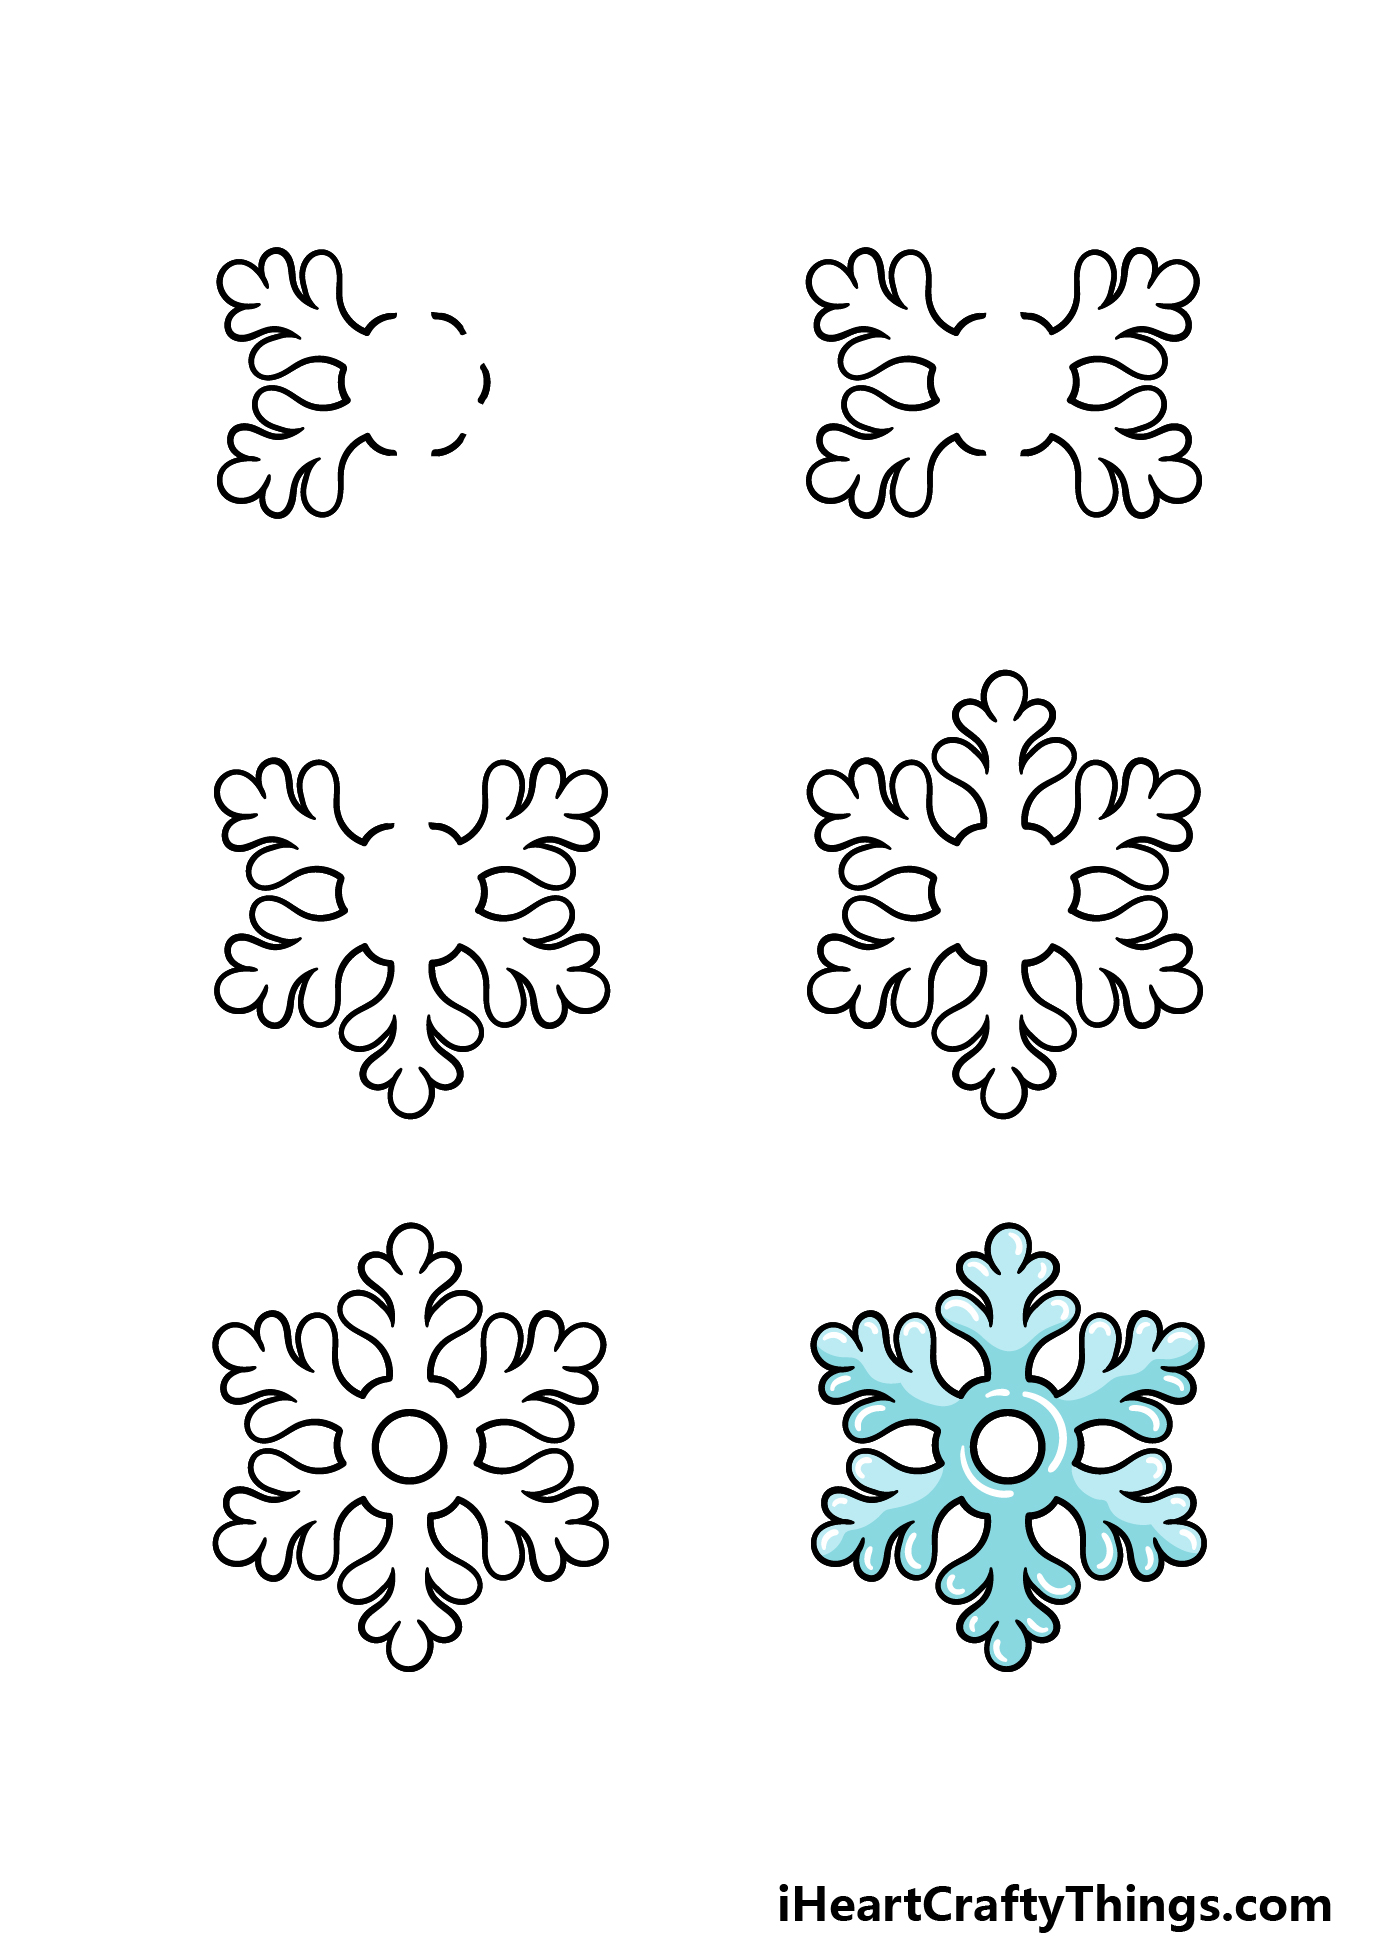 how to draw a cartoon snowflake in 6 steps